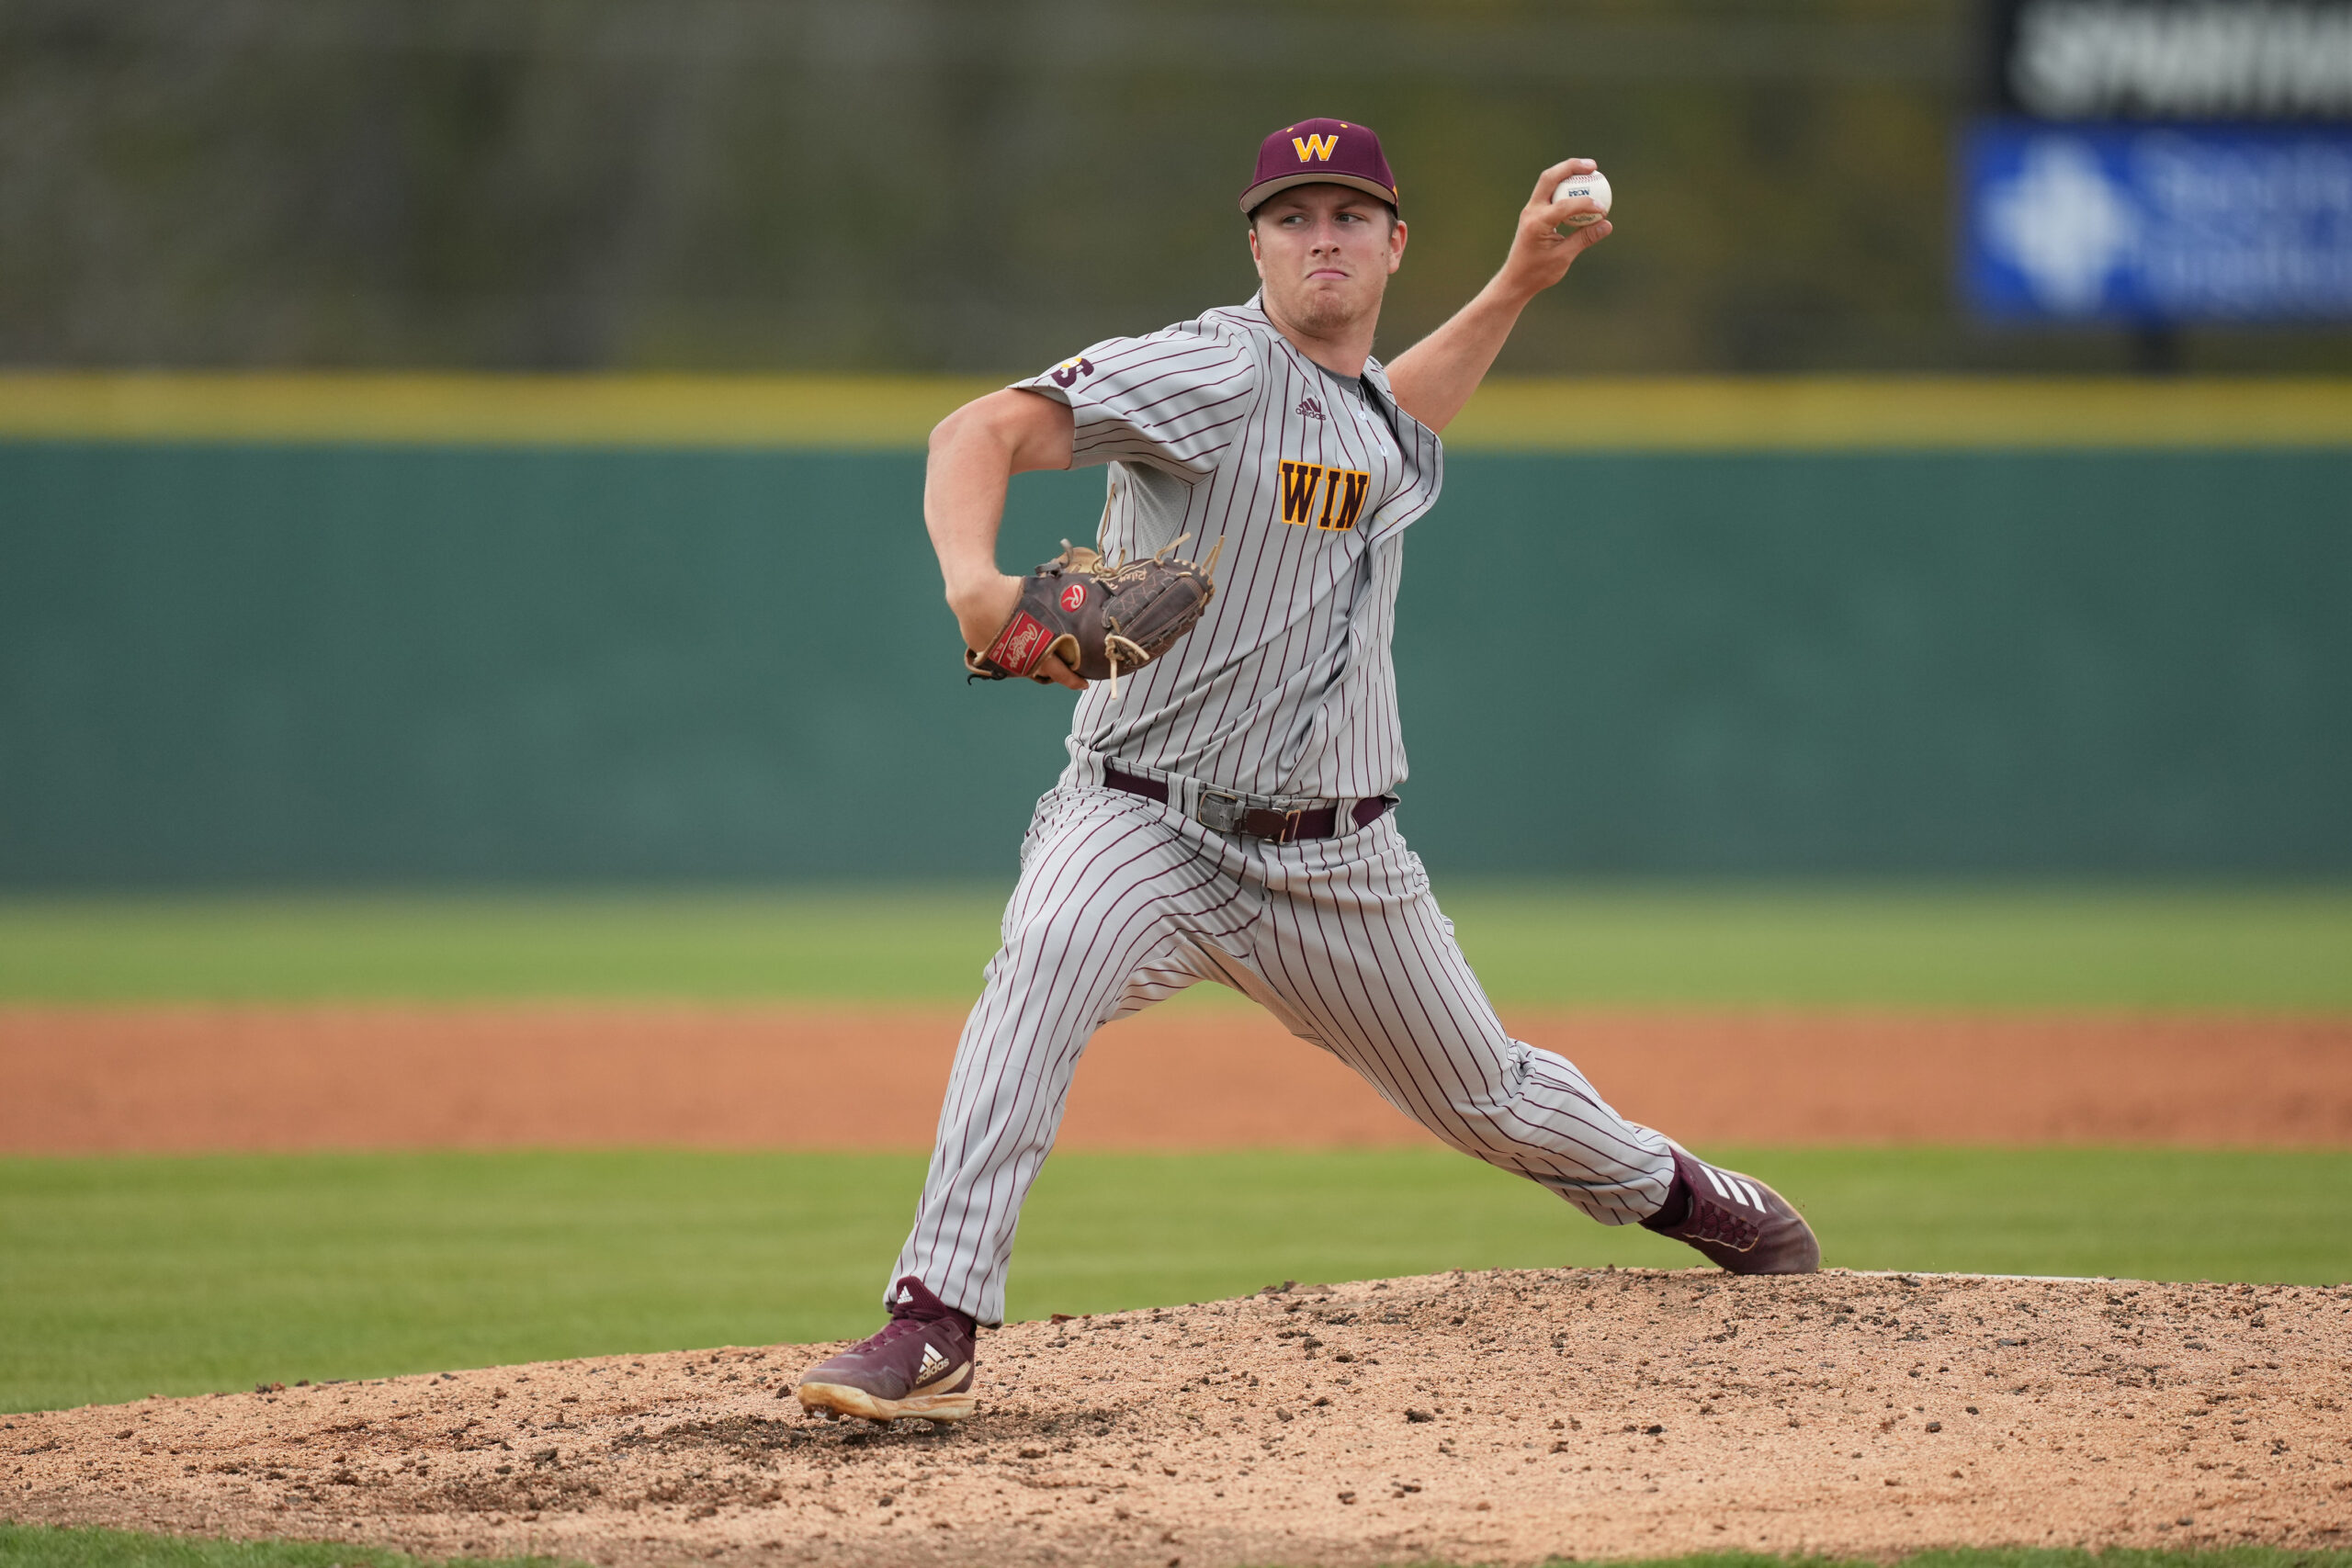 Drew Burress Records 4 HRs, Huge Strikes Out 20 in NCAA Week 3 Standouts